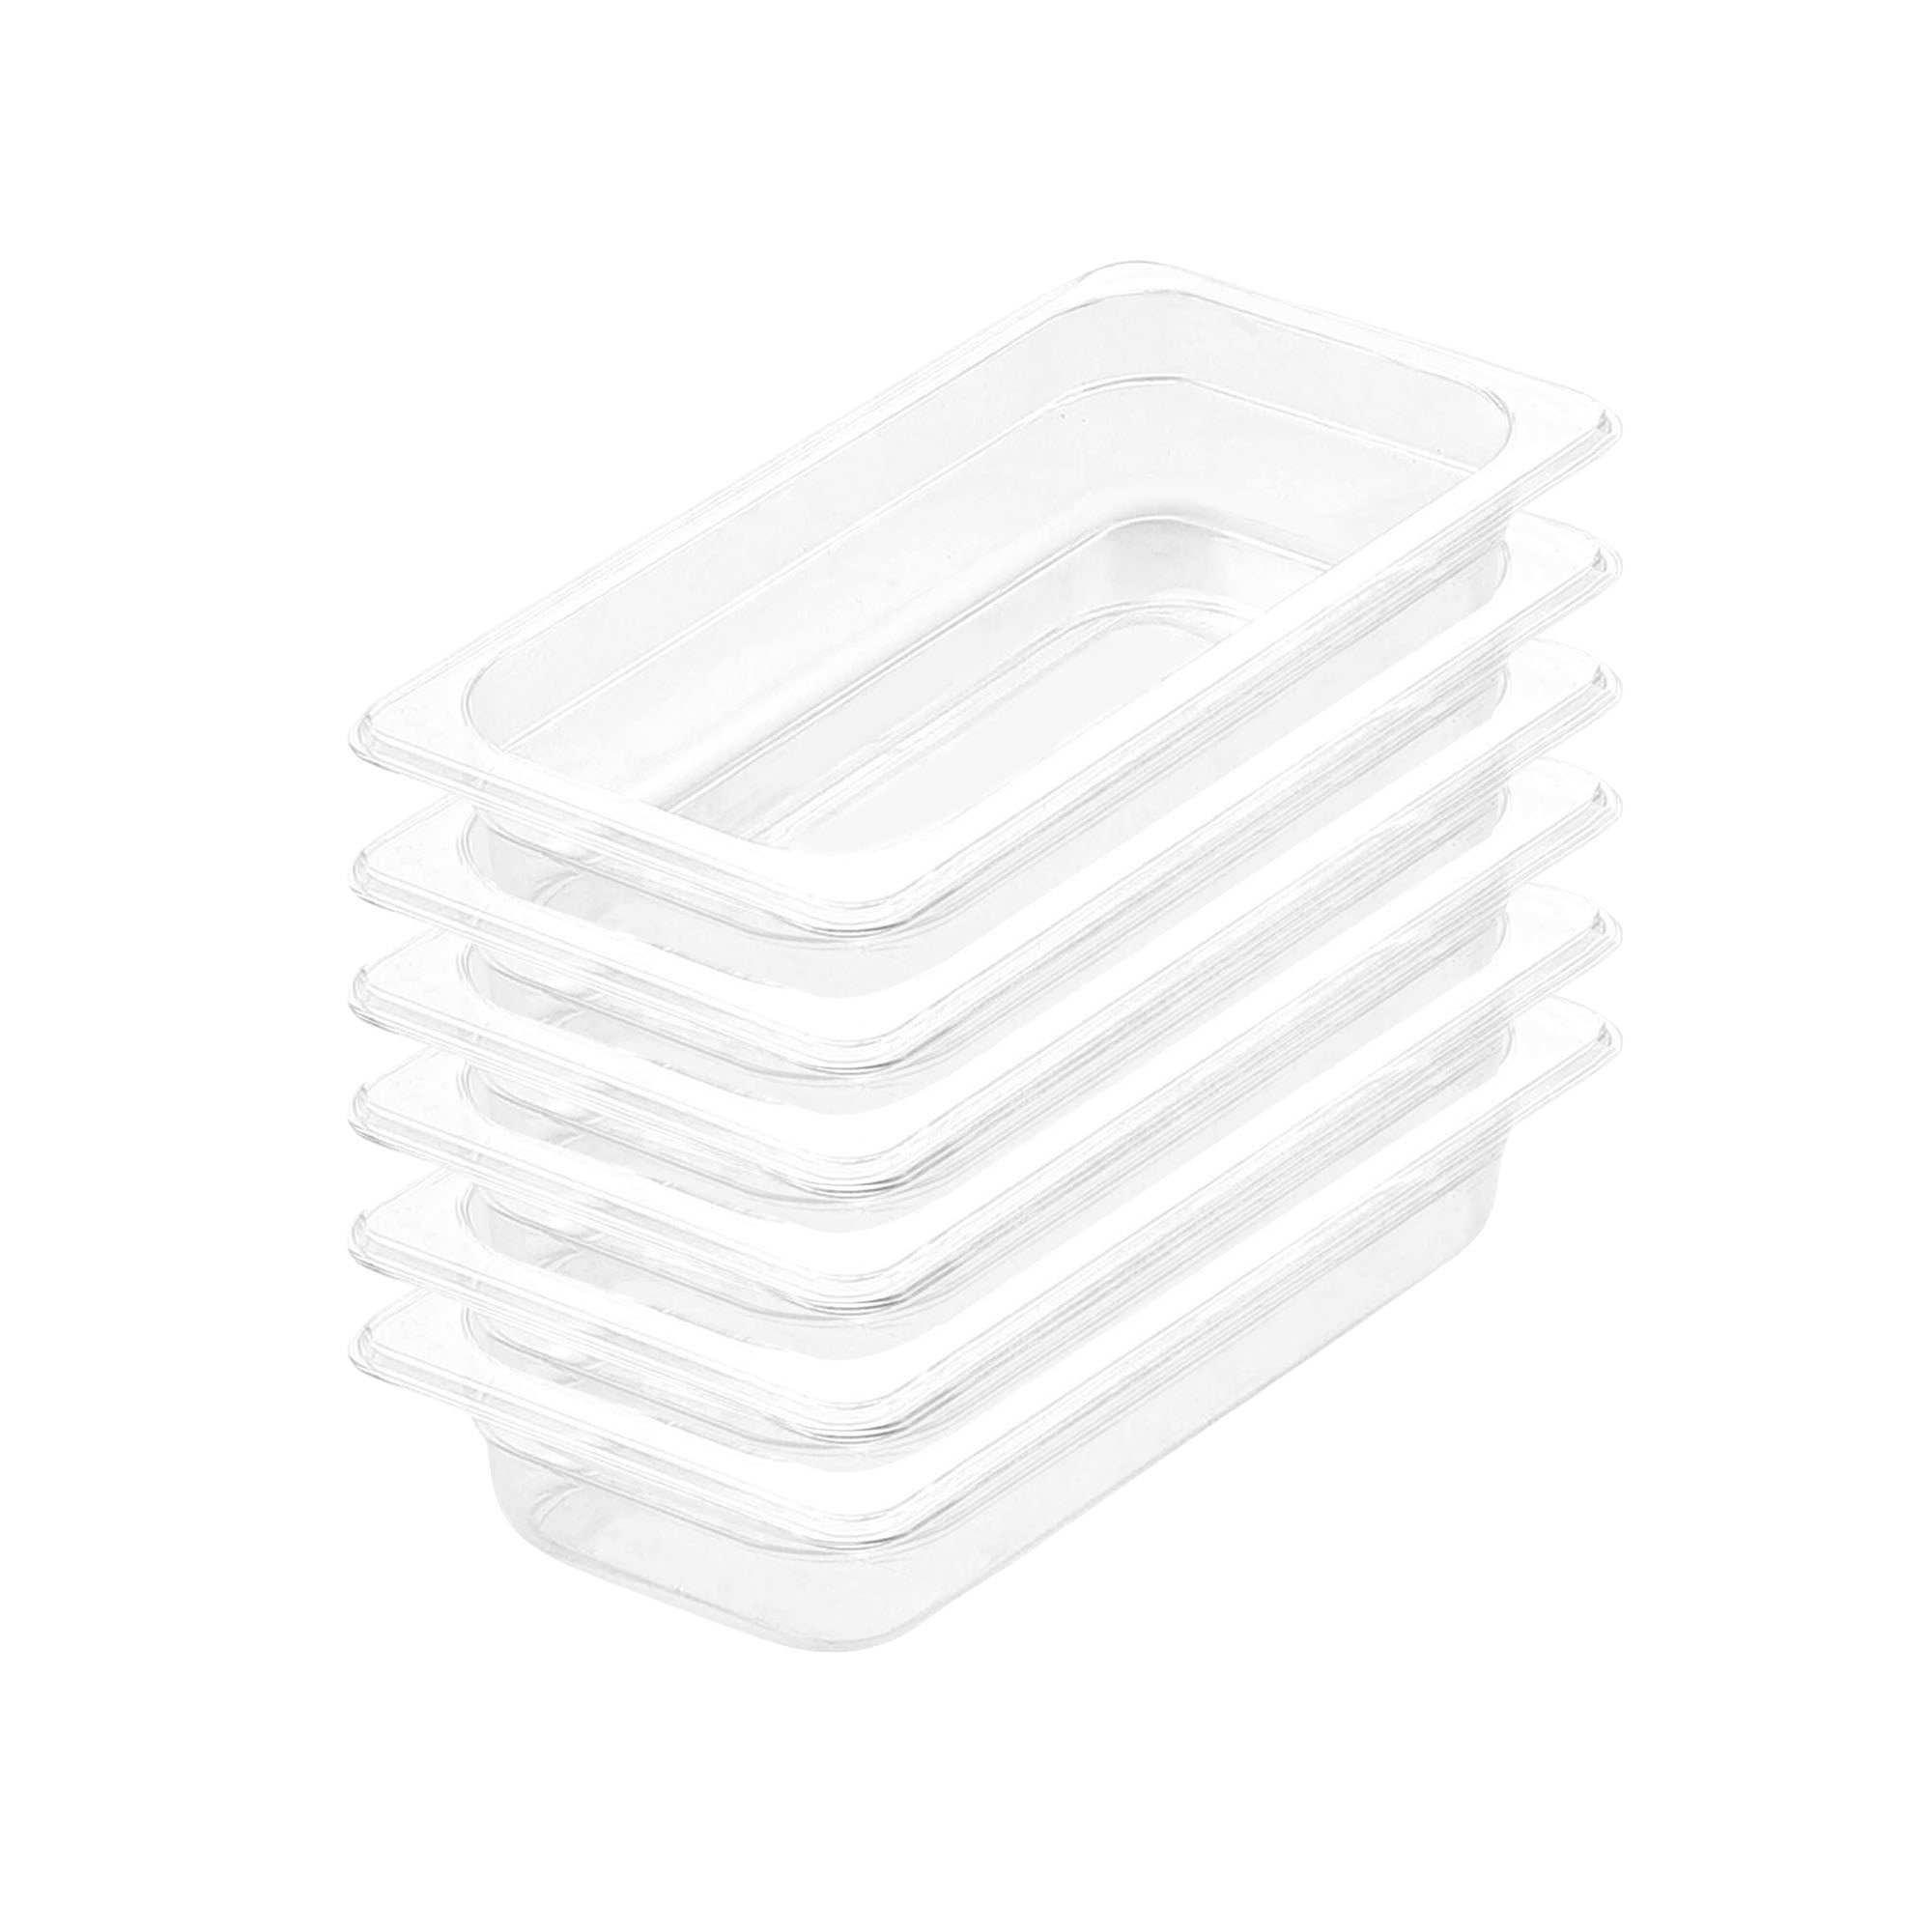 SOGA 65mm Clear Gastronorm GN Pan 1/3 Food Tray Storage Bundle of 6